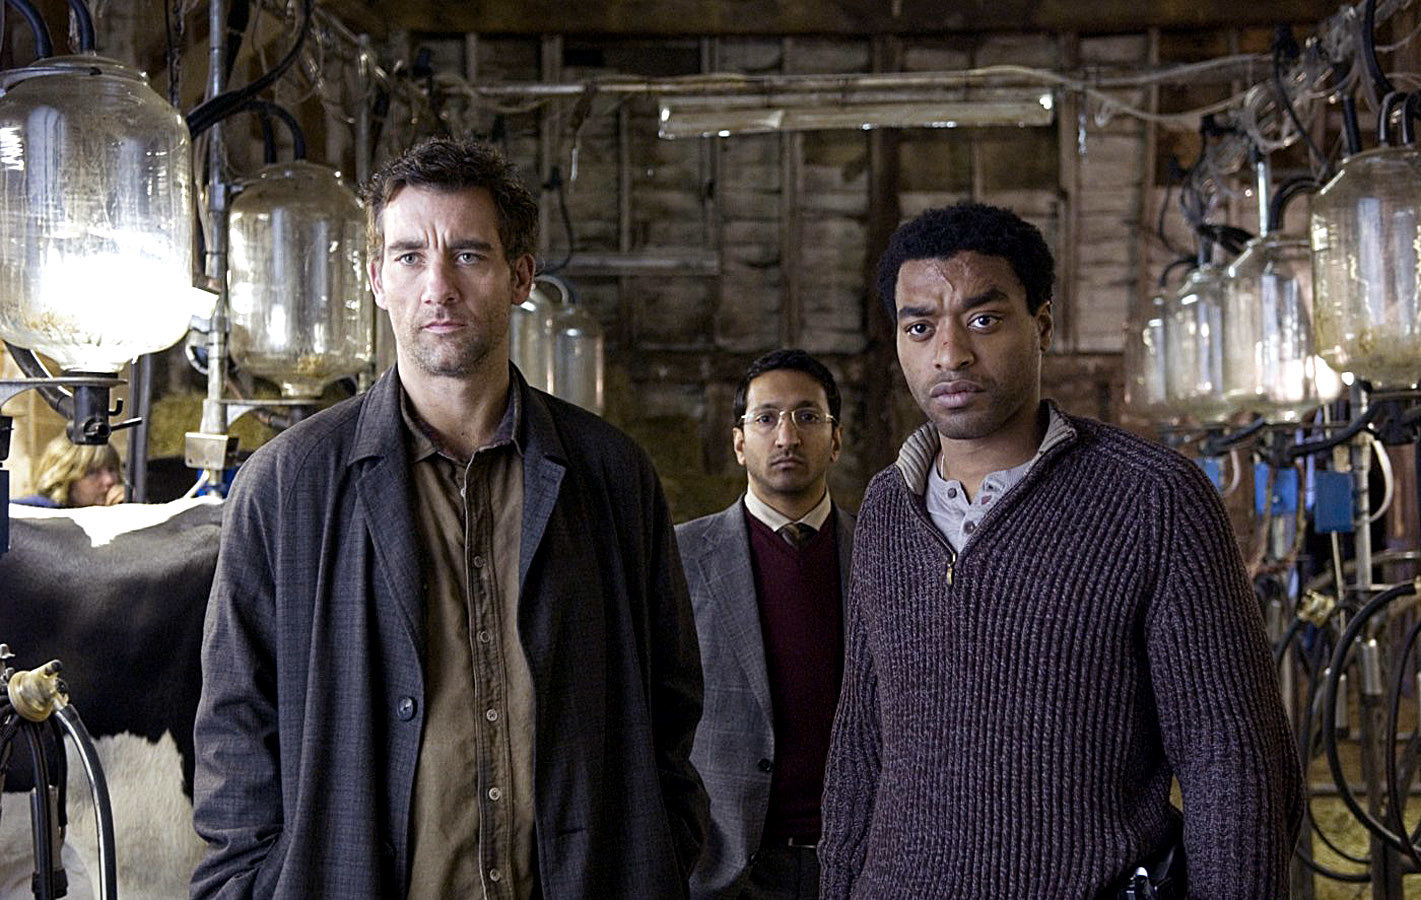 Clive Owen, Paul Sharma, Chiwetel Ejiofor, standing in a barn full of cows attached to jars